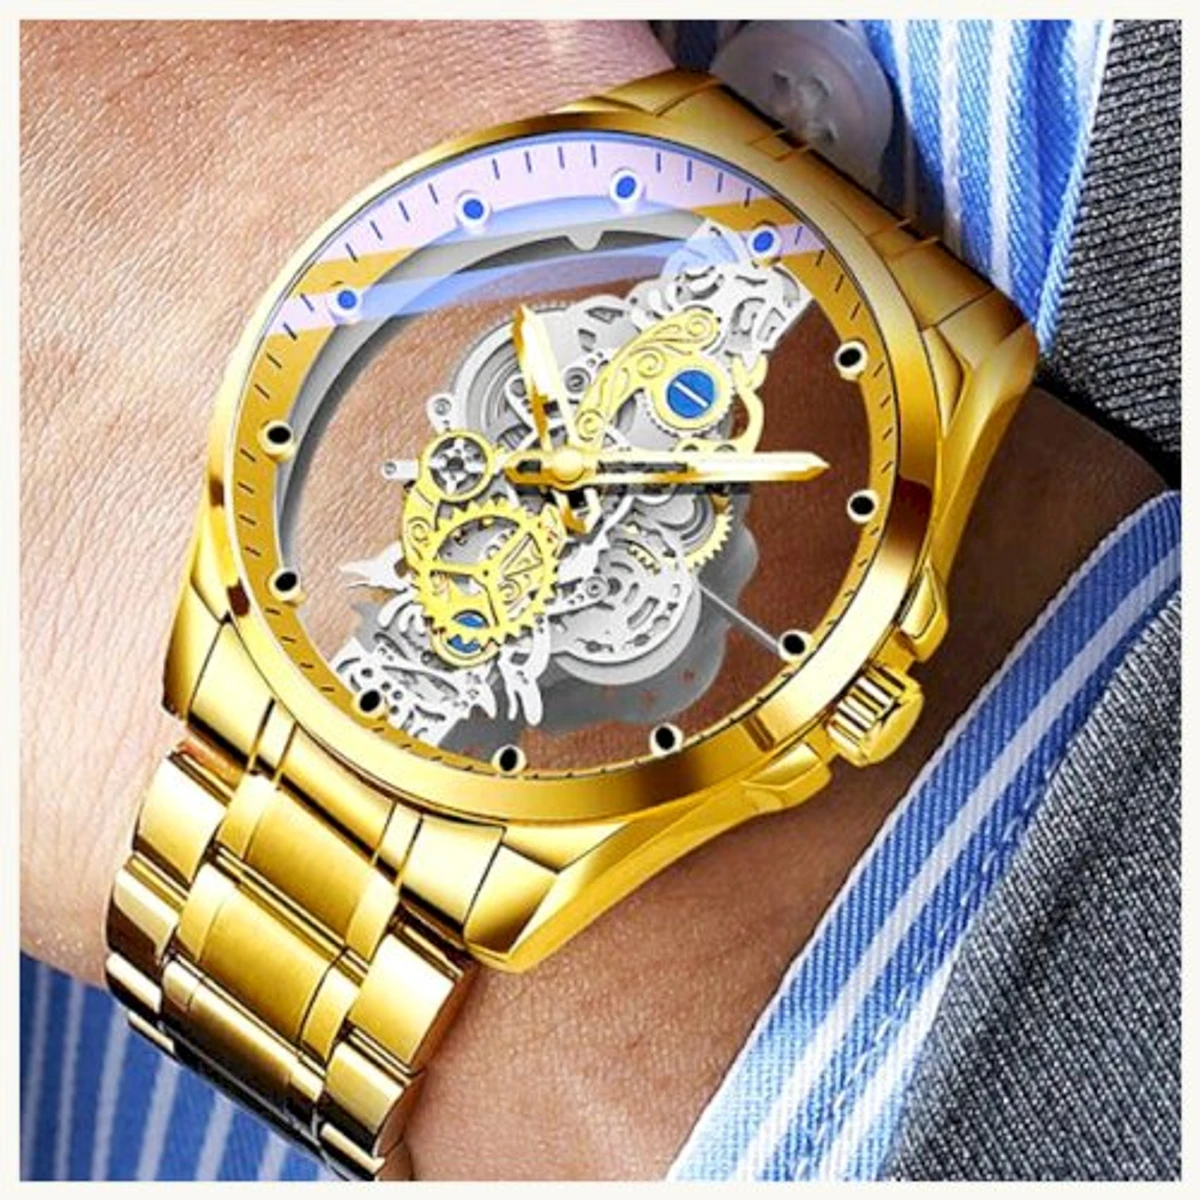 Top Luxury Men Casual Fashion Watch Gold color